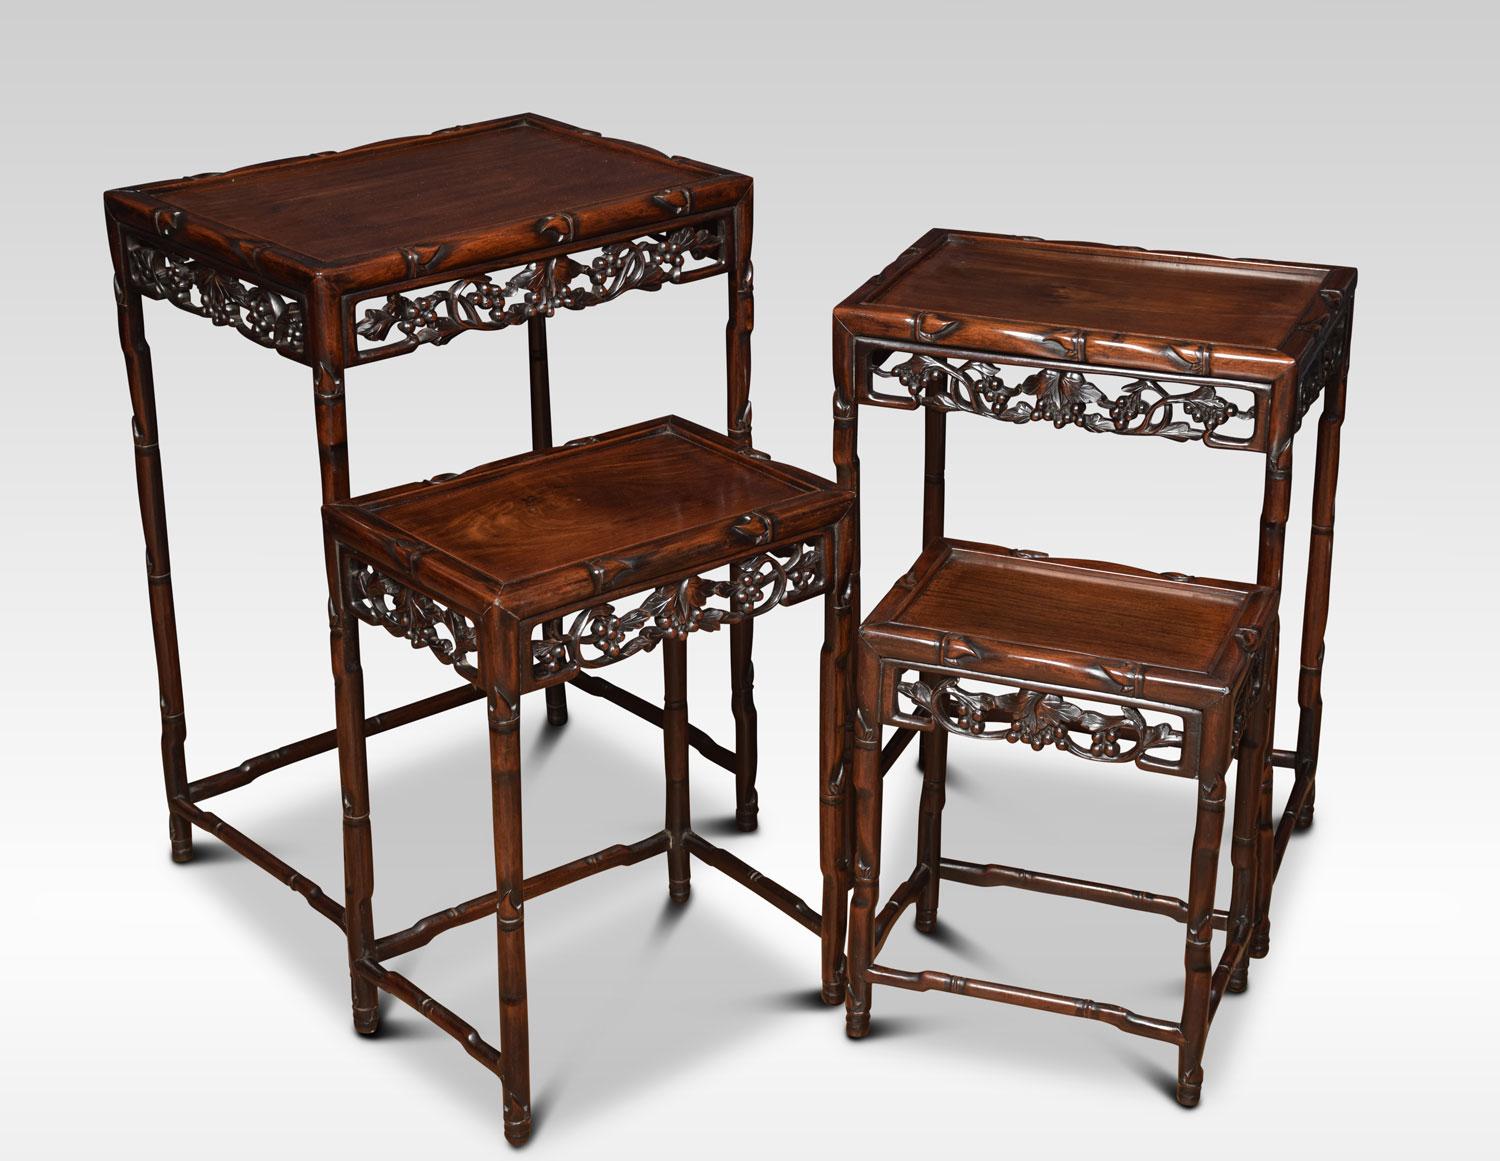 Nest of four Chinese rosewood occasional tables each with a rectangular top with carved faux-bamboo edge. Above a pierced grapevine frieze on faux-bamboo supports joined by stretchers.
Dimensions:
Height 28 inches
Width 19.5 inches
Depth 14